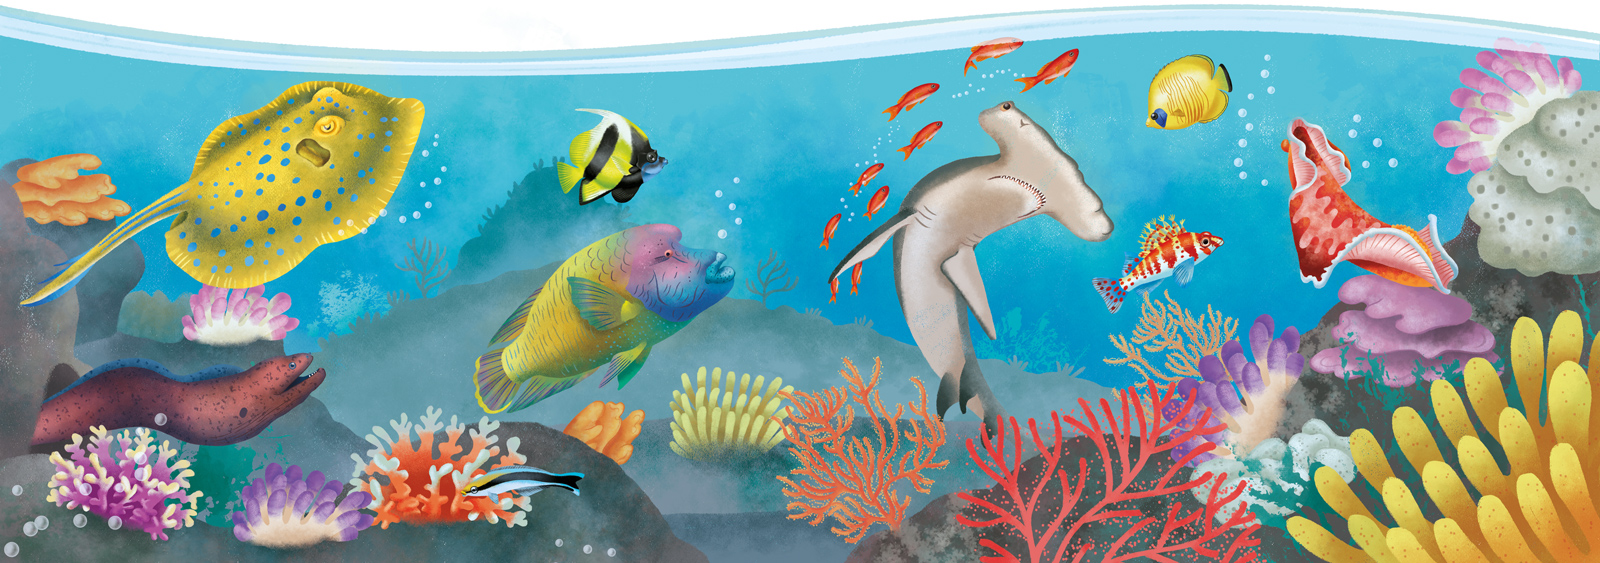 coral reef illustration: hammerhead shark, ray, corals and colorful fishes 